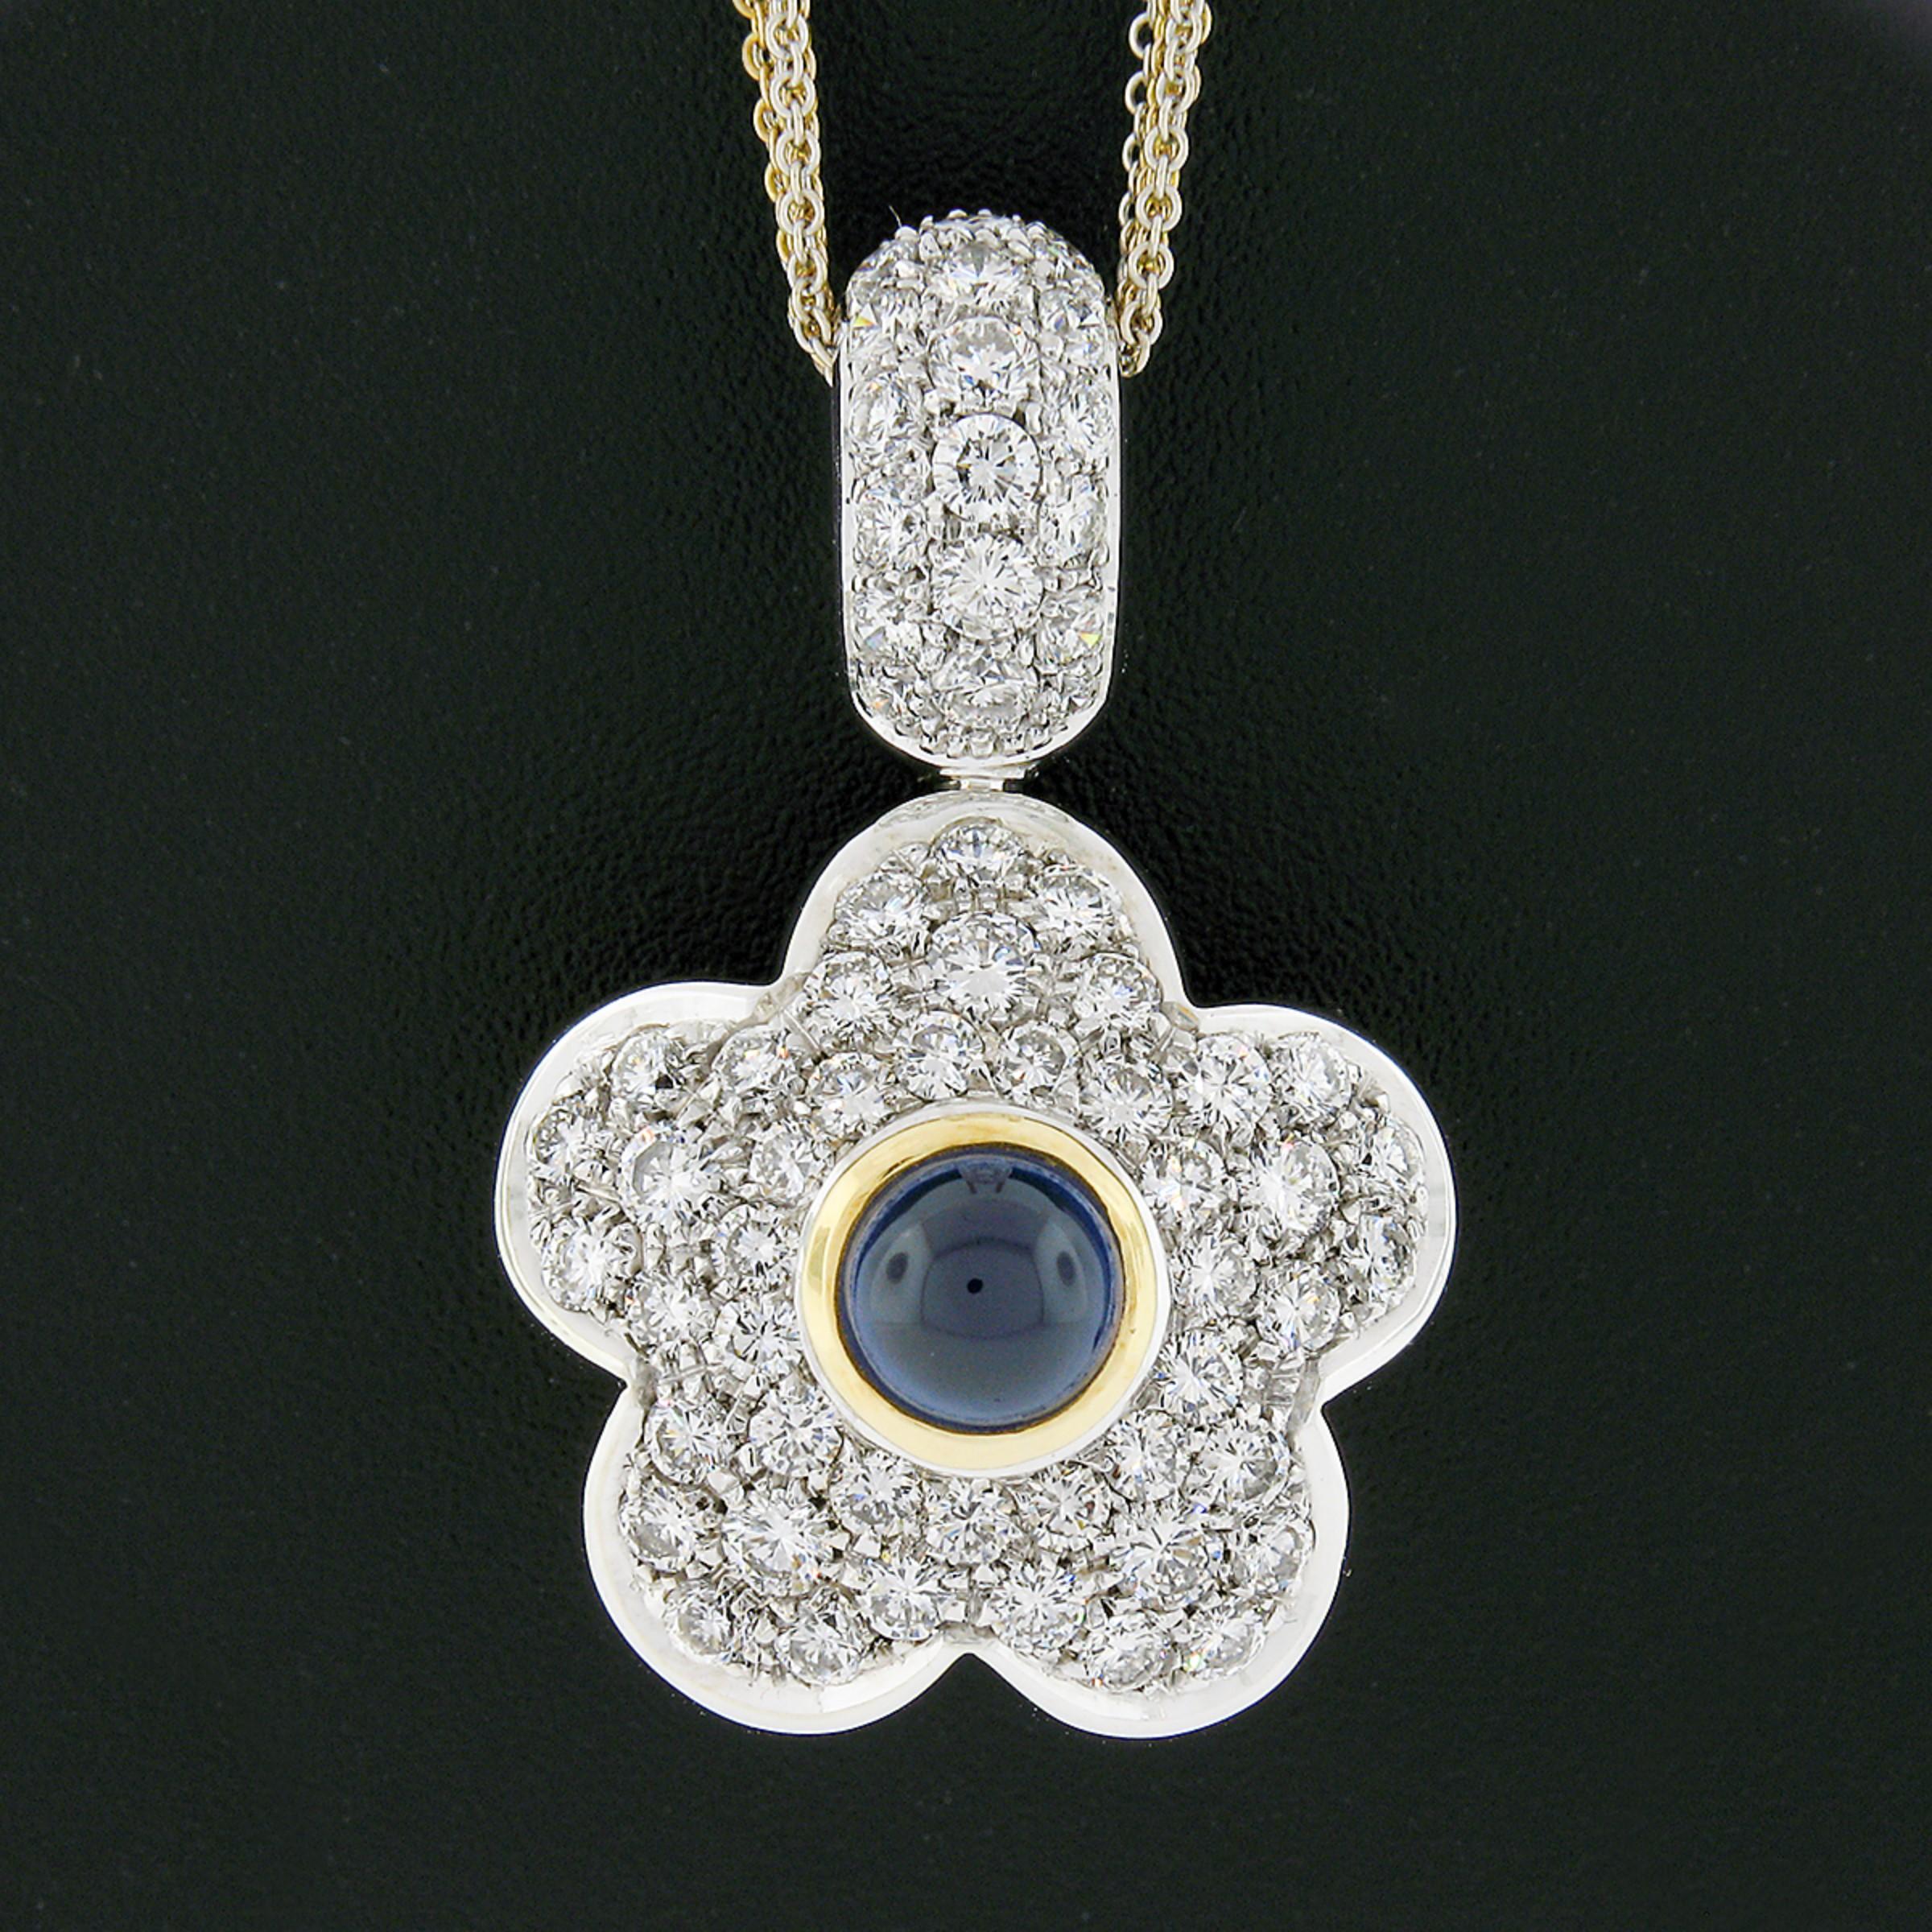 This incredible large puffed flower pendant features an ingenious reversible design that was crafted from solid 18k yellow and white gold. The front of the flower is drenched with round brilliant cut diamonds that are neatly pave set in white gold,